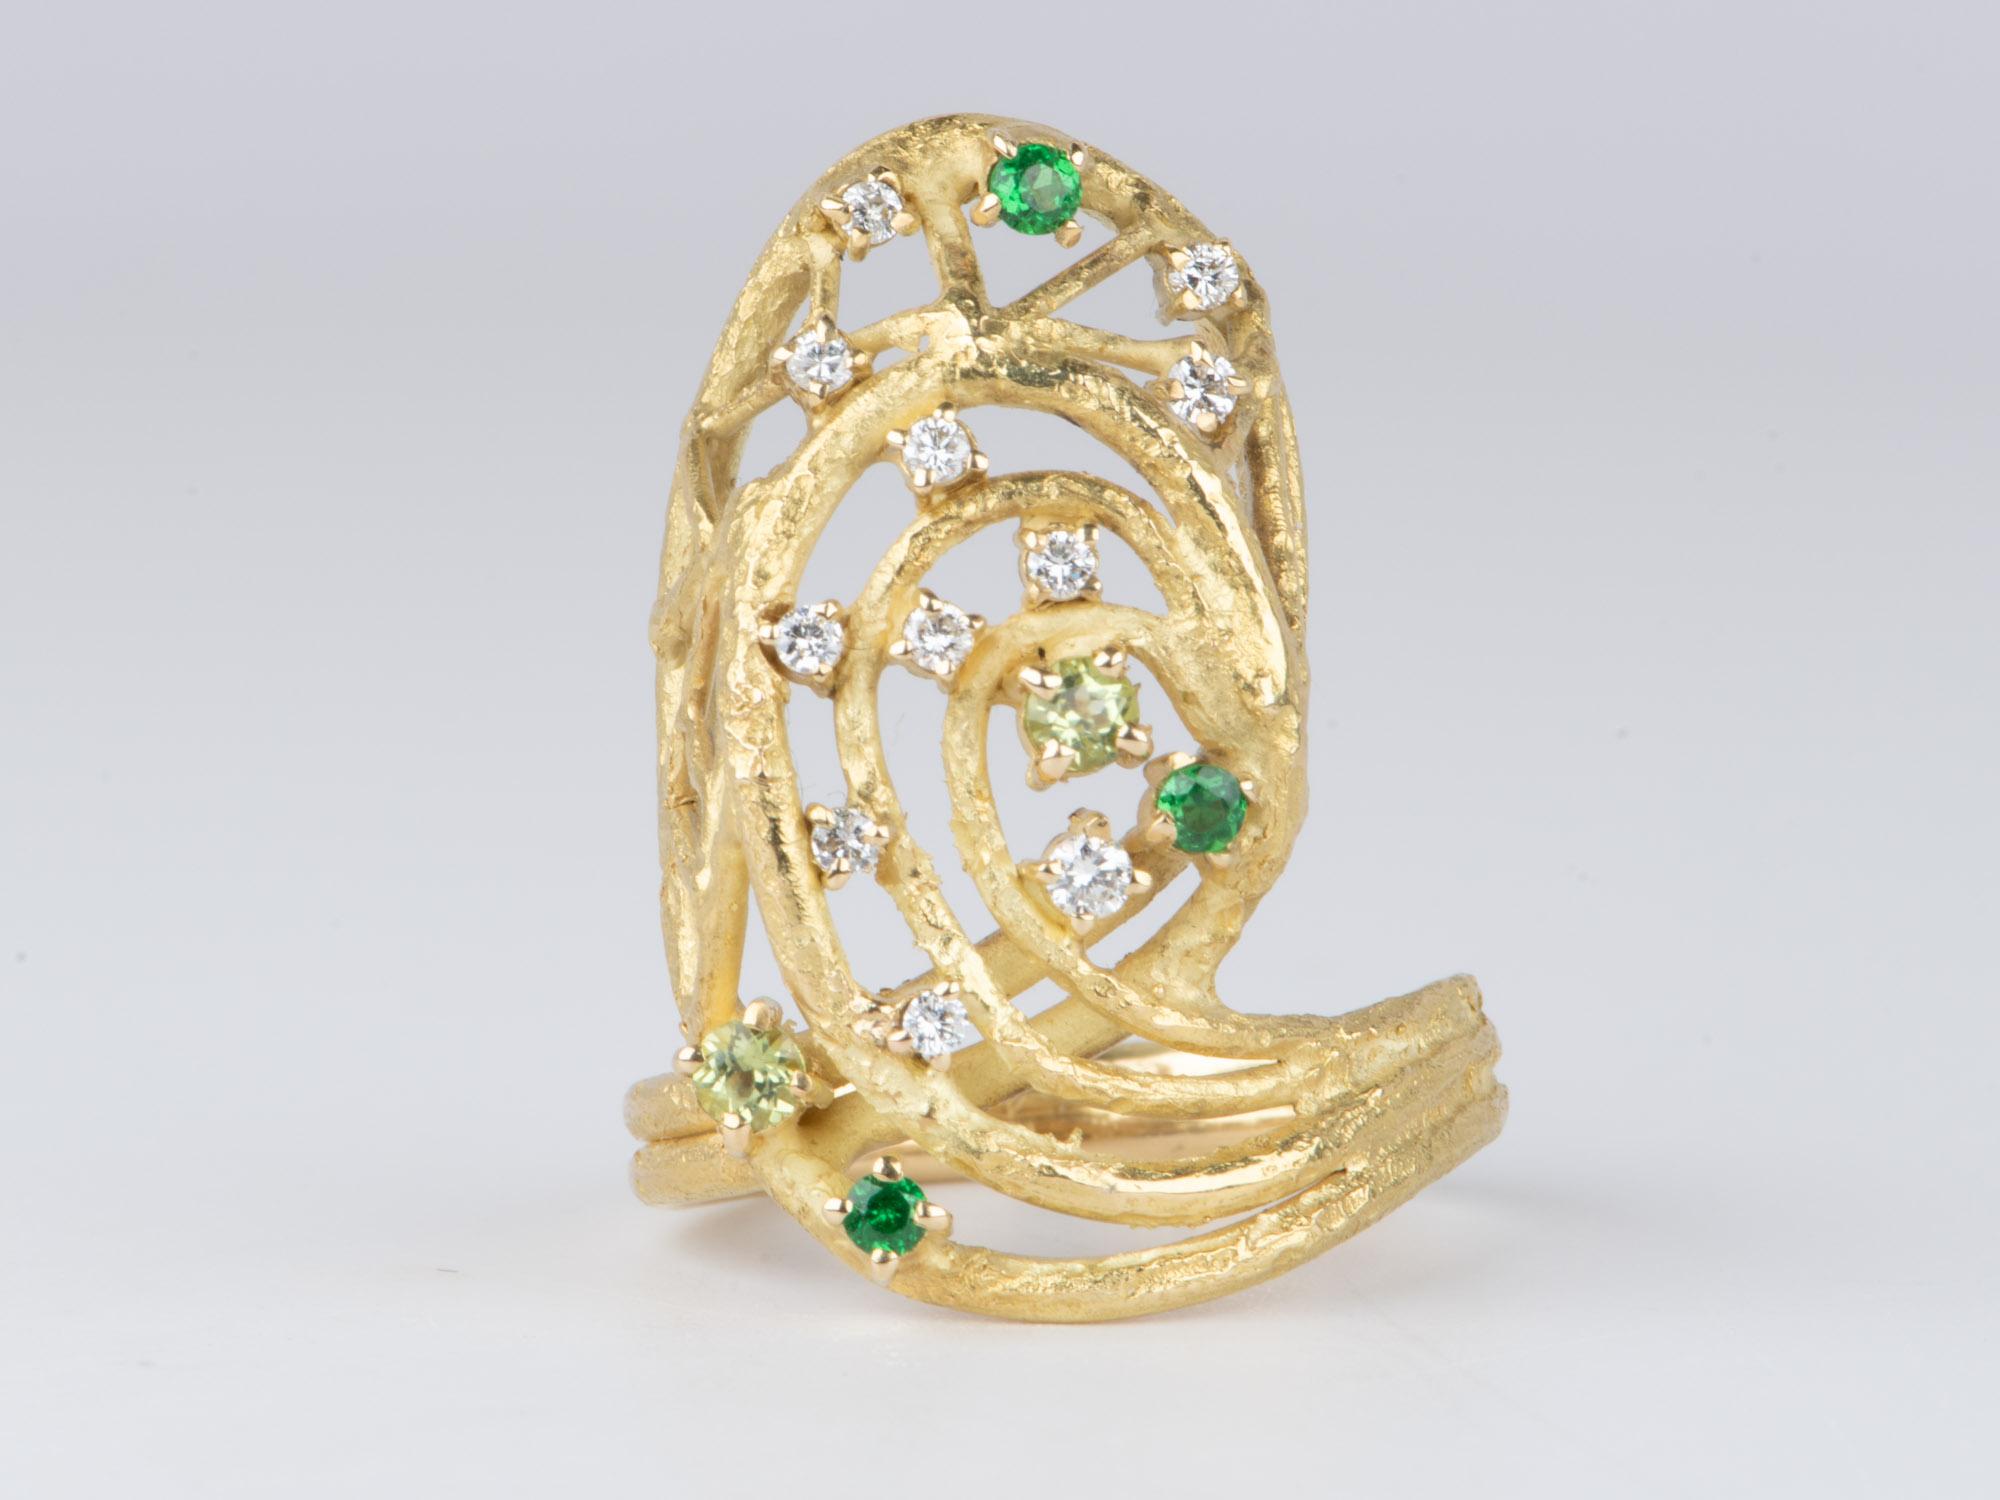 This Modernist Design Ring is truly extraordinary. It has a unique texture that nicely complements the cluster of diamonds and bright green and mint green garnets. The great finger coverage in luxurious 18K gold will make you stand out from the